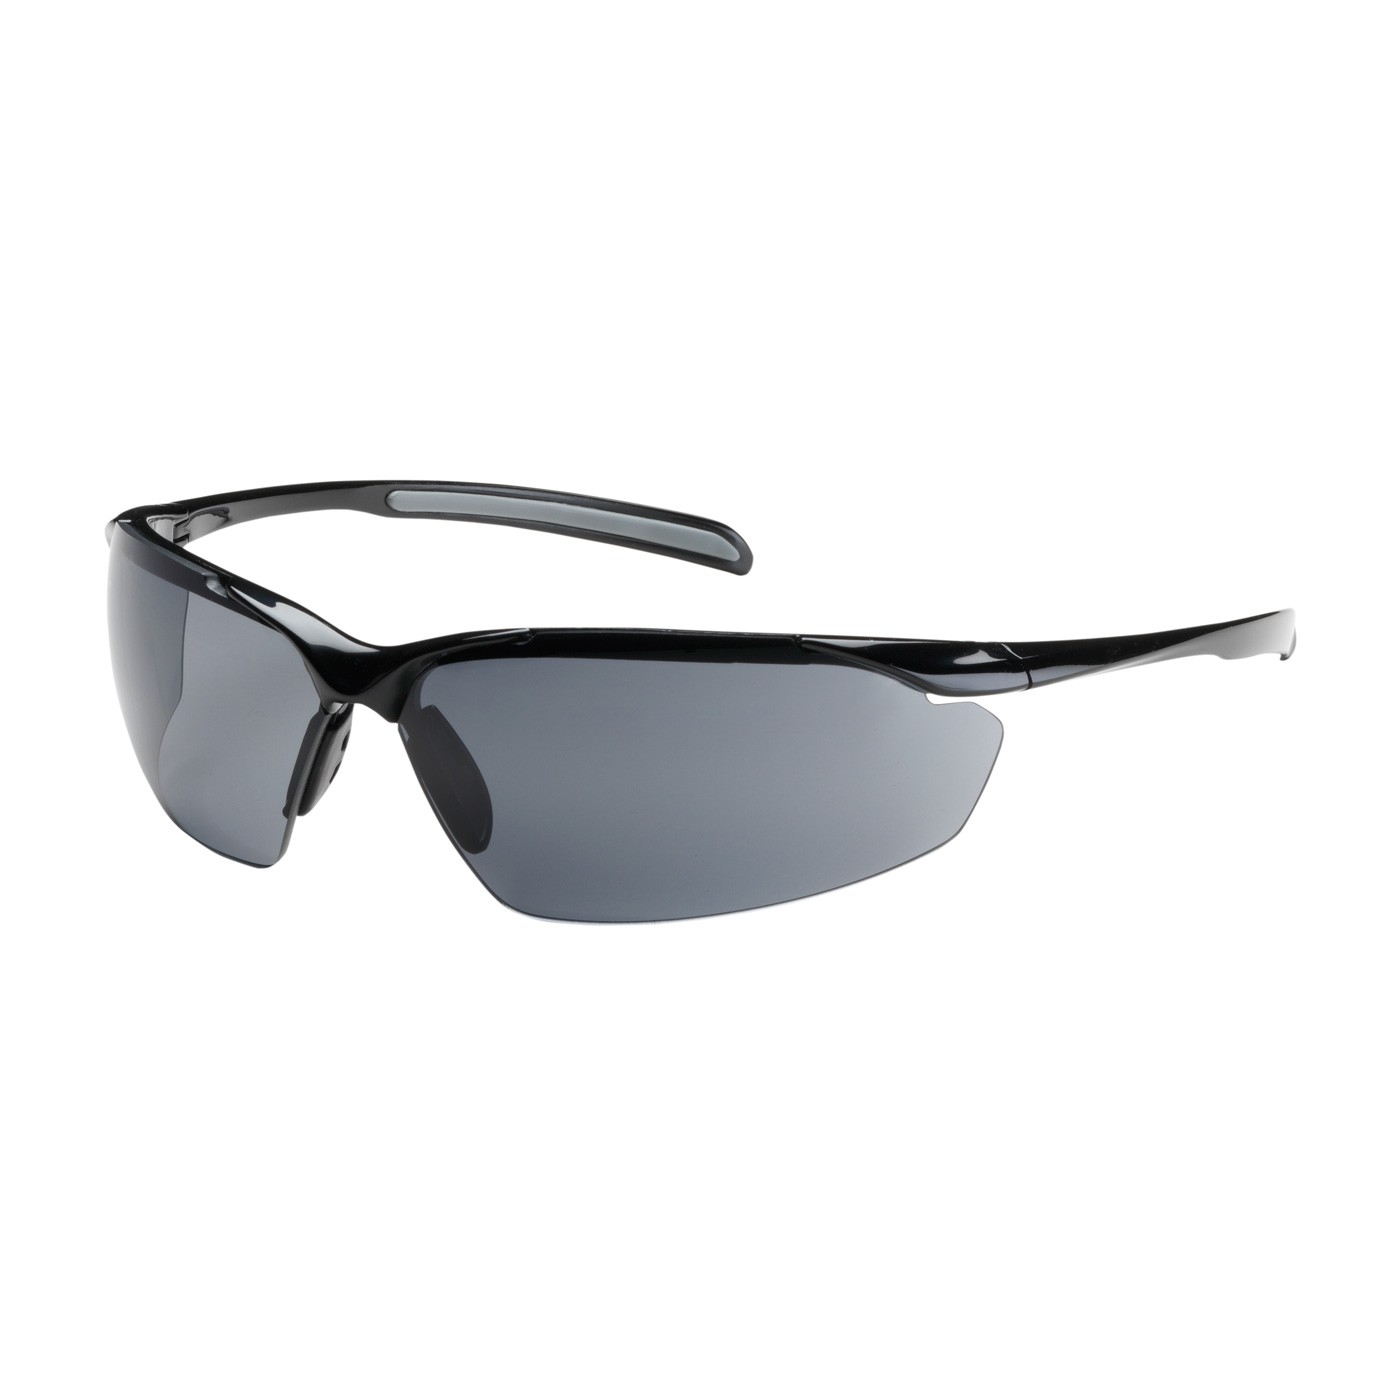 Commander™ Semi-Rimless Safety Glasses with Gloss Black Frame, Gray Lens and Anti-Scratch / Anti-Fog Coating  (#250-33-0021)